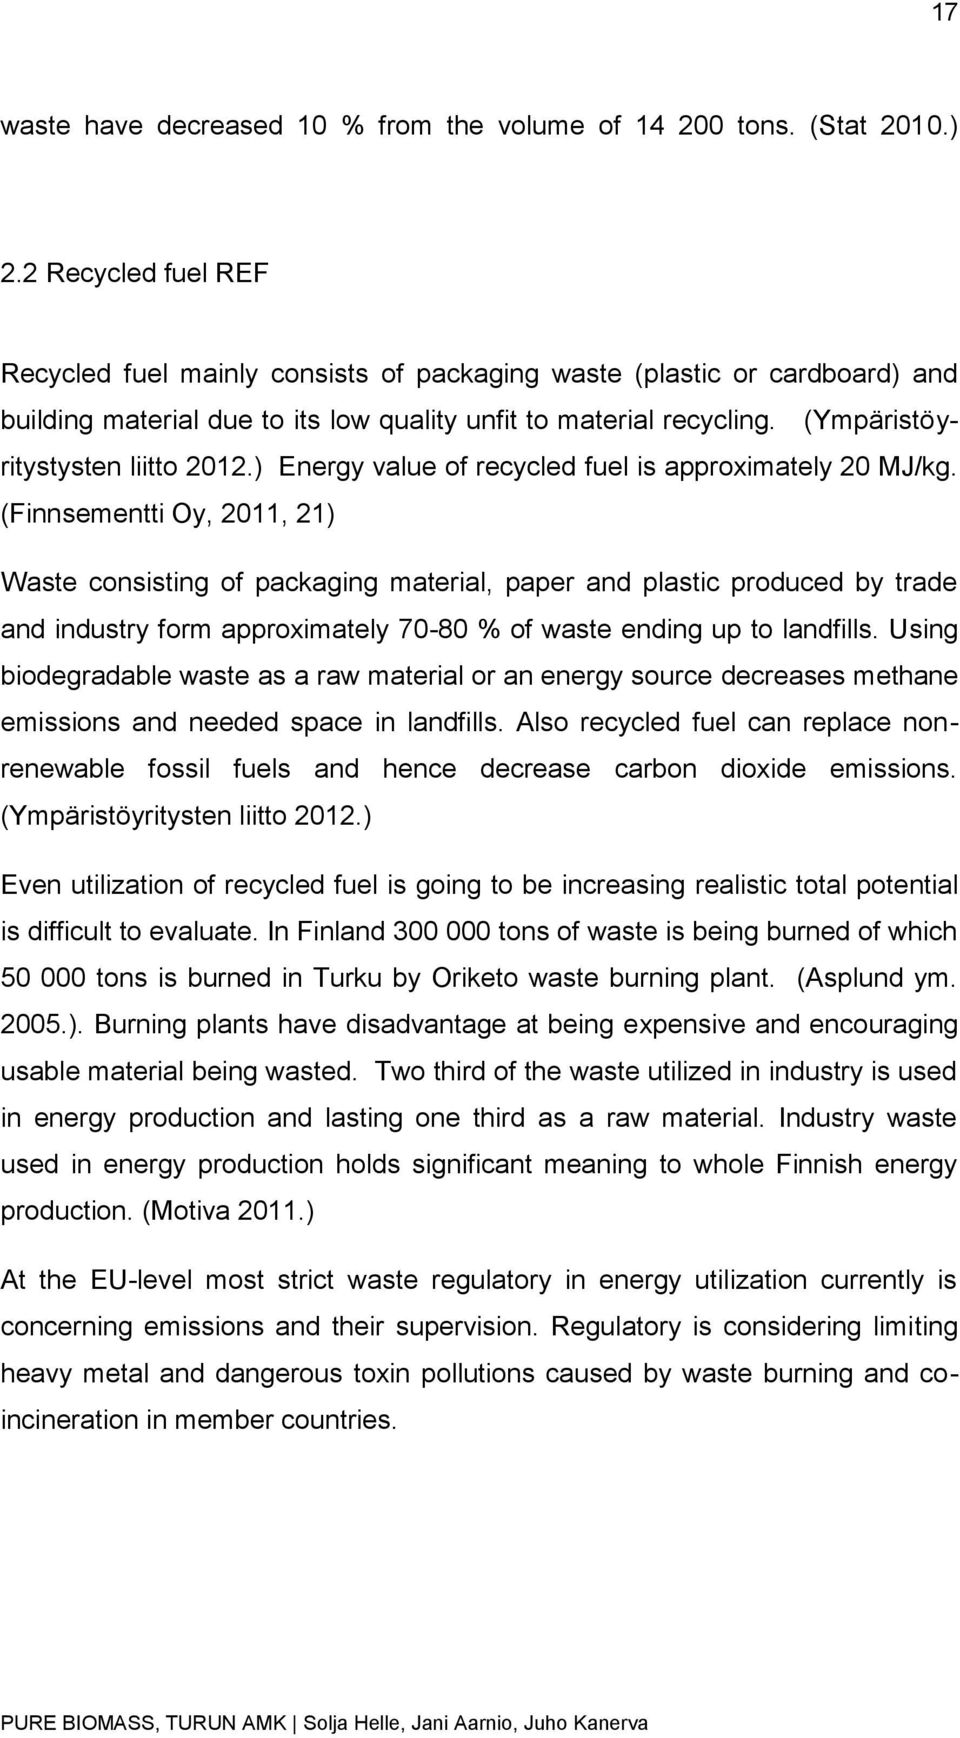 (Ympäristöyritystysten liitto 2012.) Energy value of recycled fuel is approximately 20 MJ/kg.